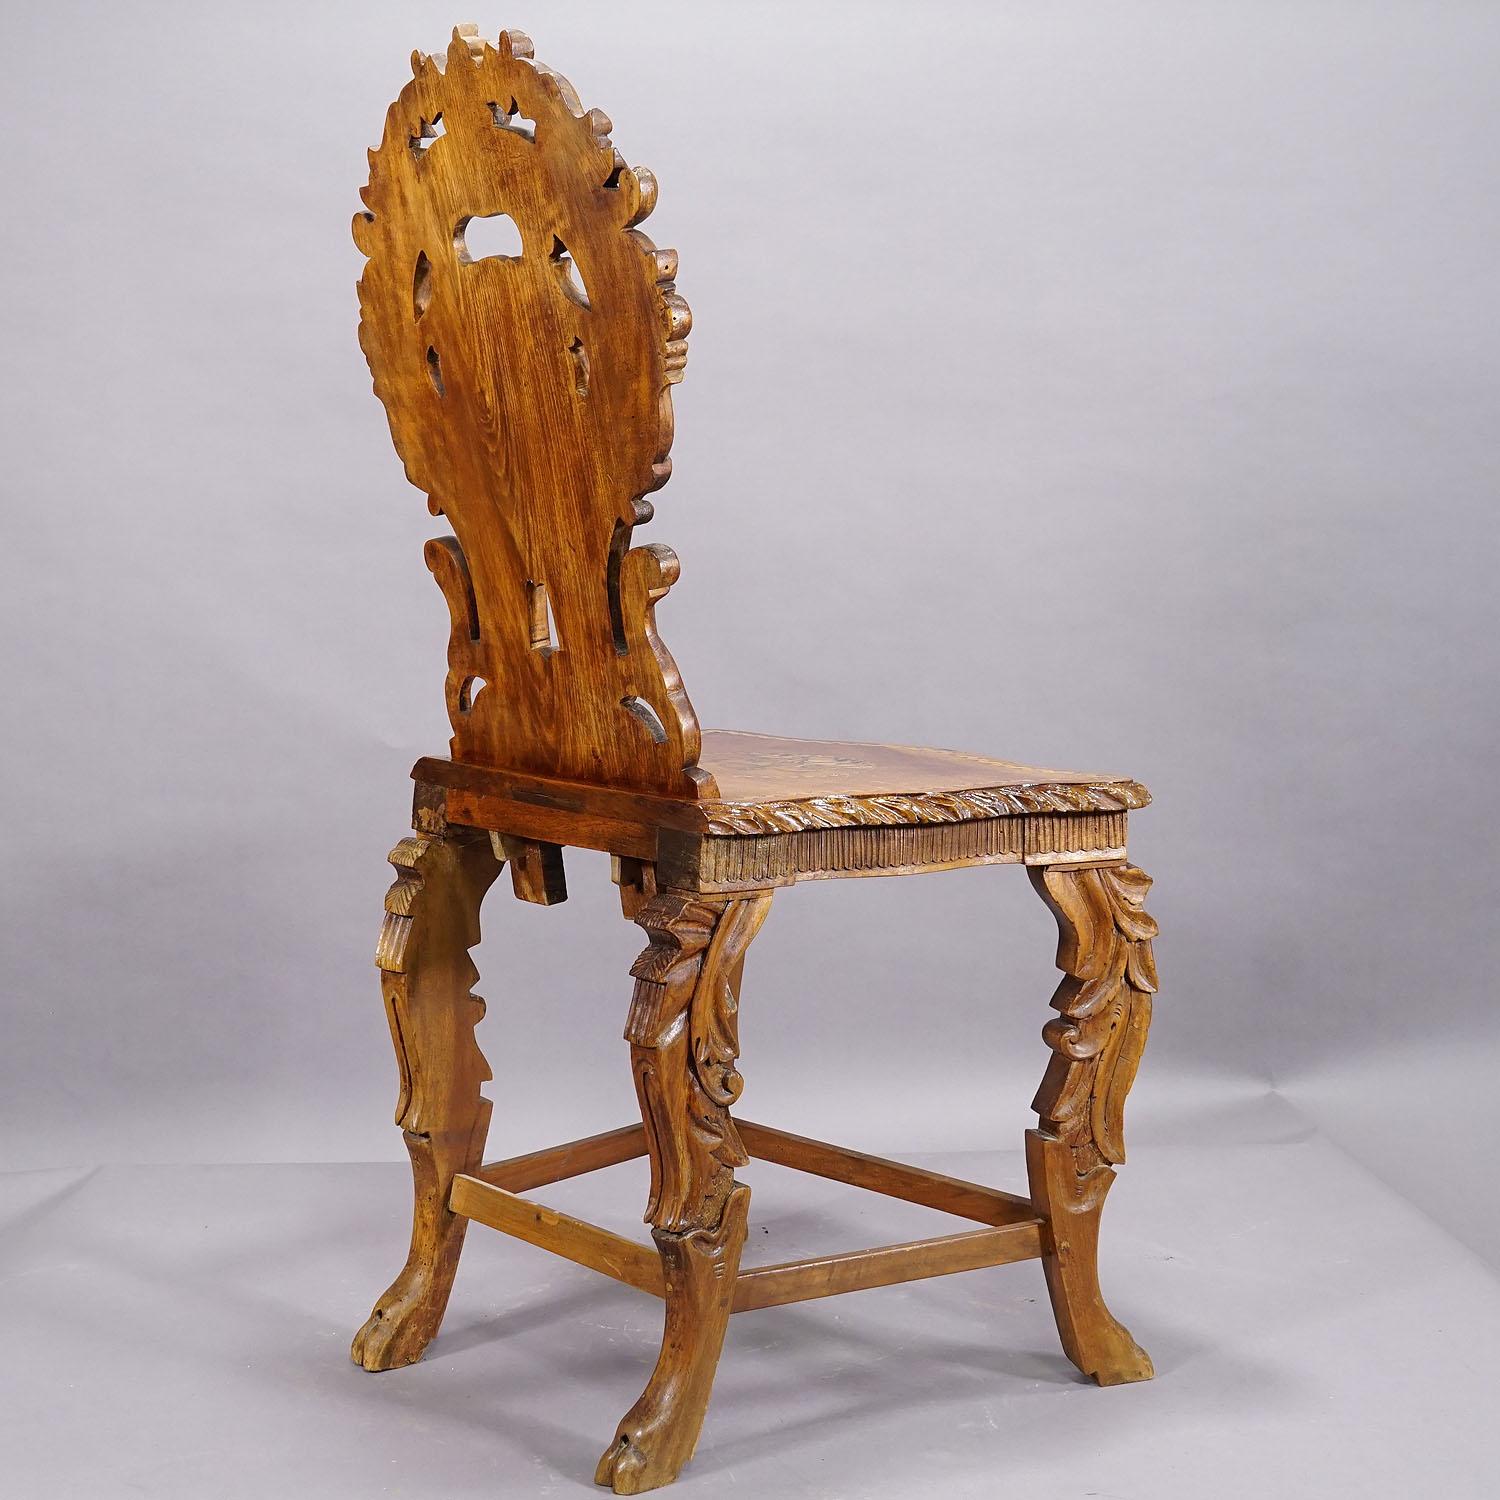 20th Century Rare Nutwood Edelweis Marquetry Chair Swiss Brienz 1900 For Sale